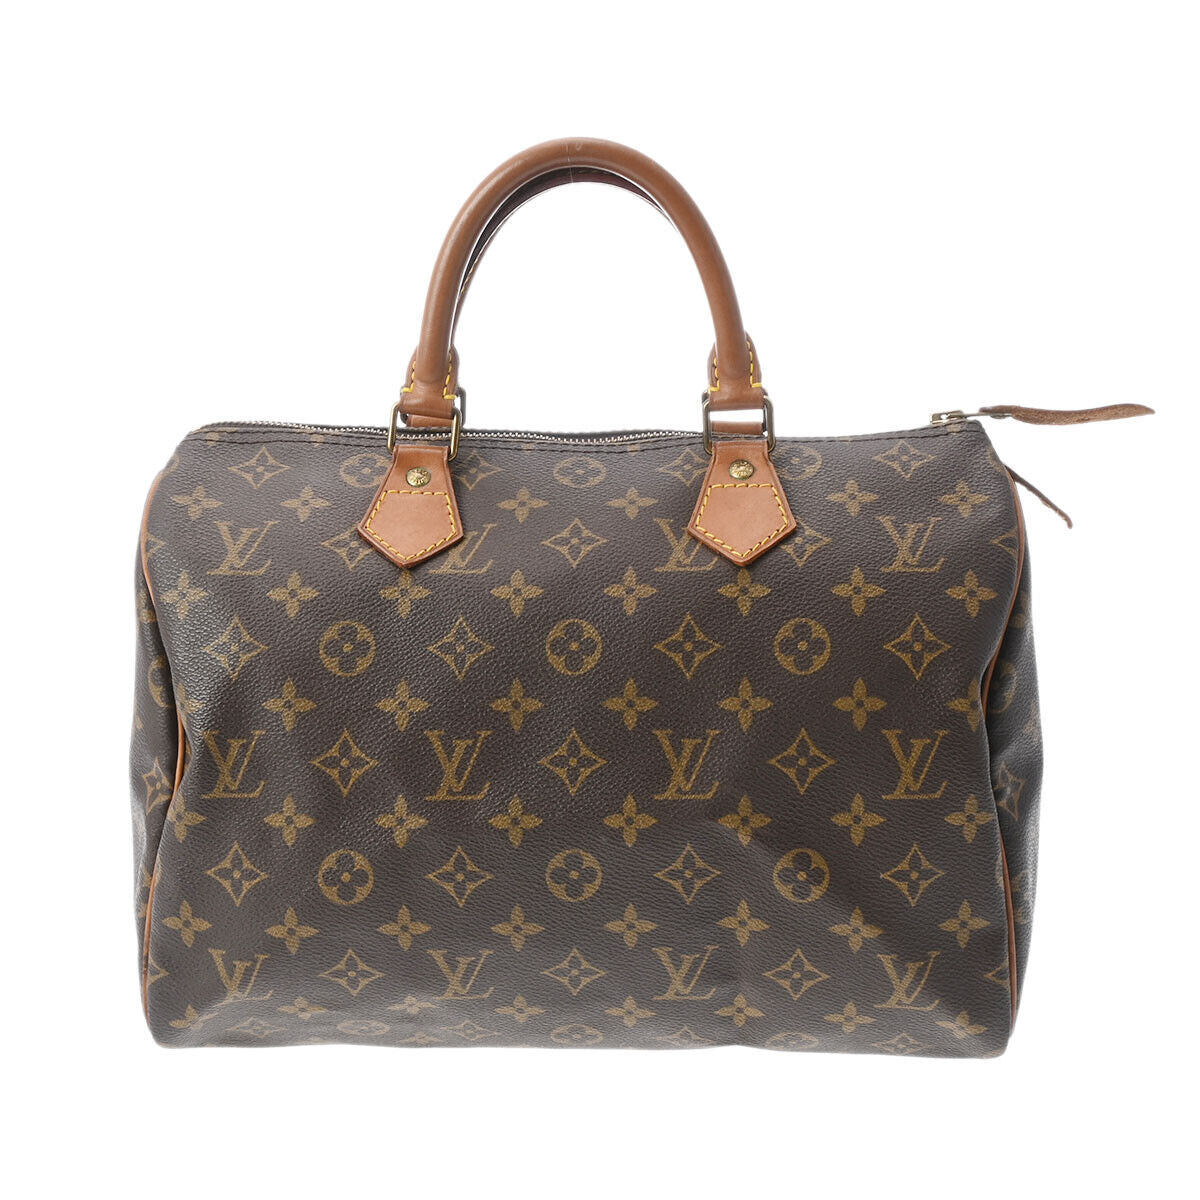 Authenticated Used Louis Vuitton Monogram Portefeuille Emily